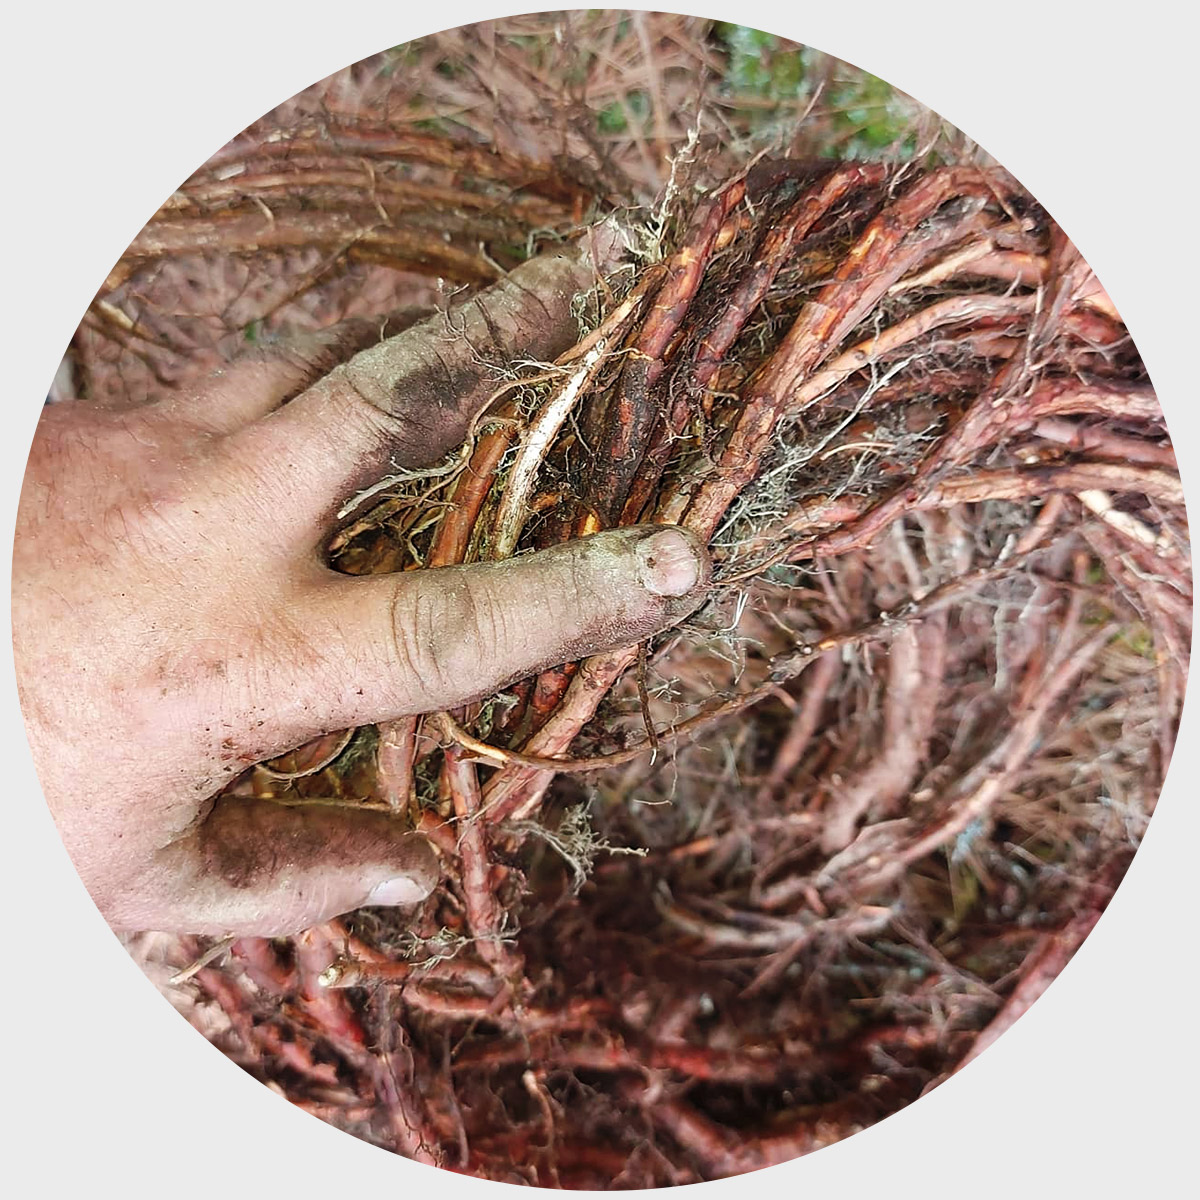 Todd Labrador's hand holding tree roots